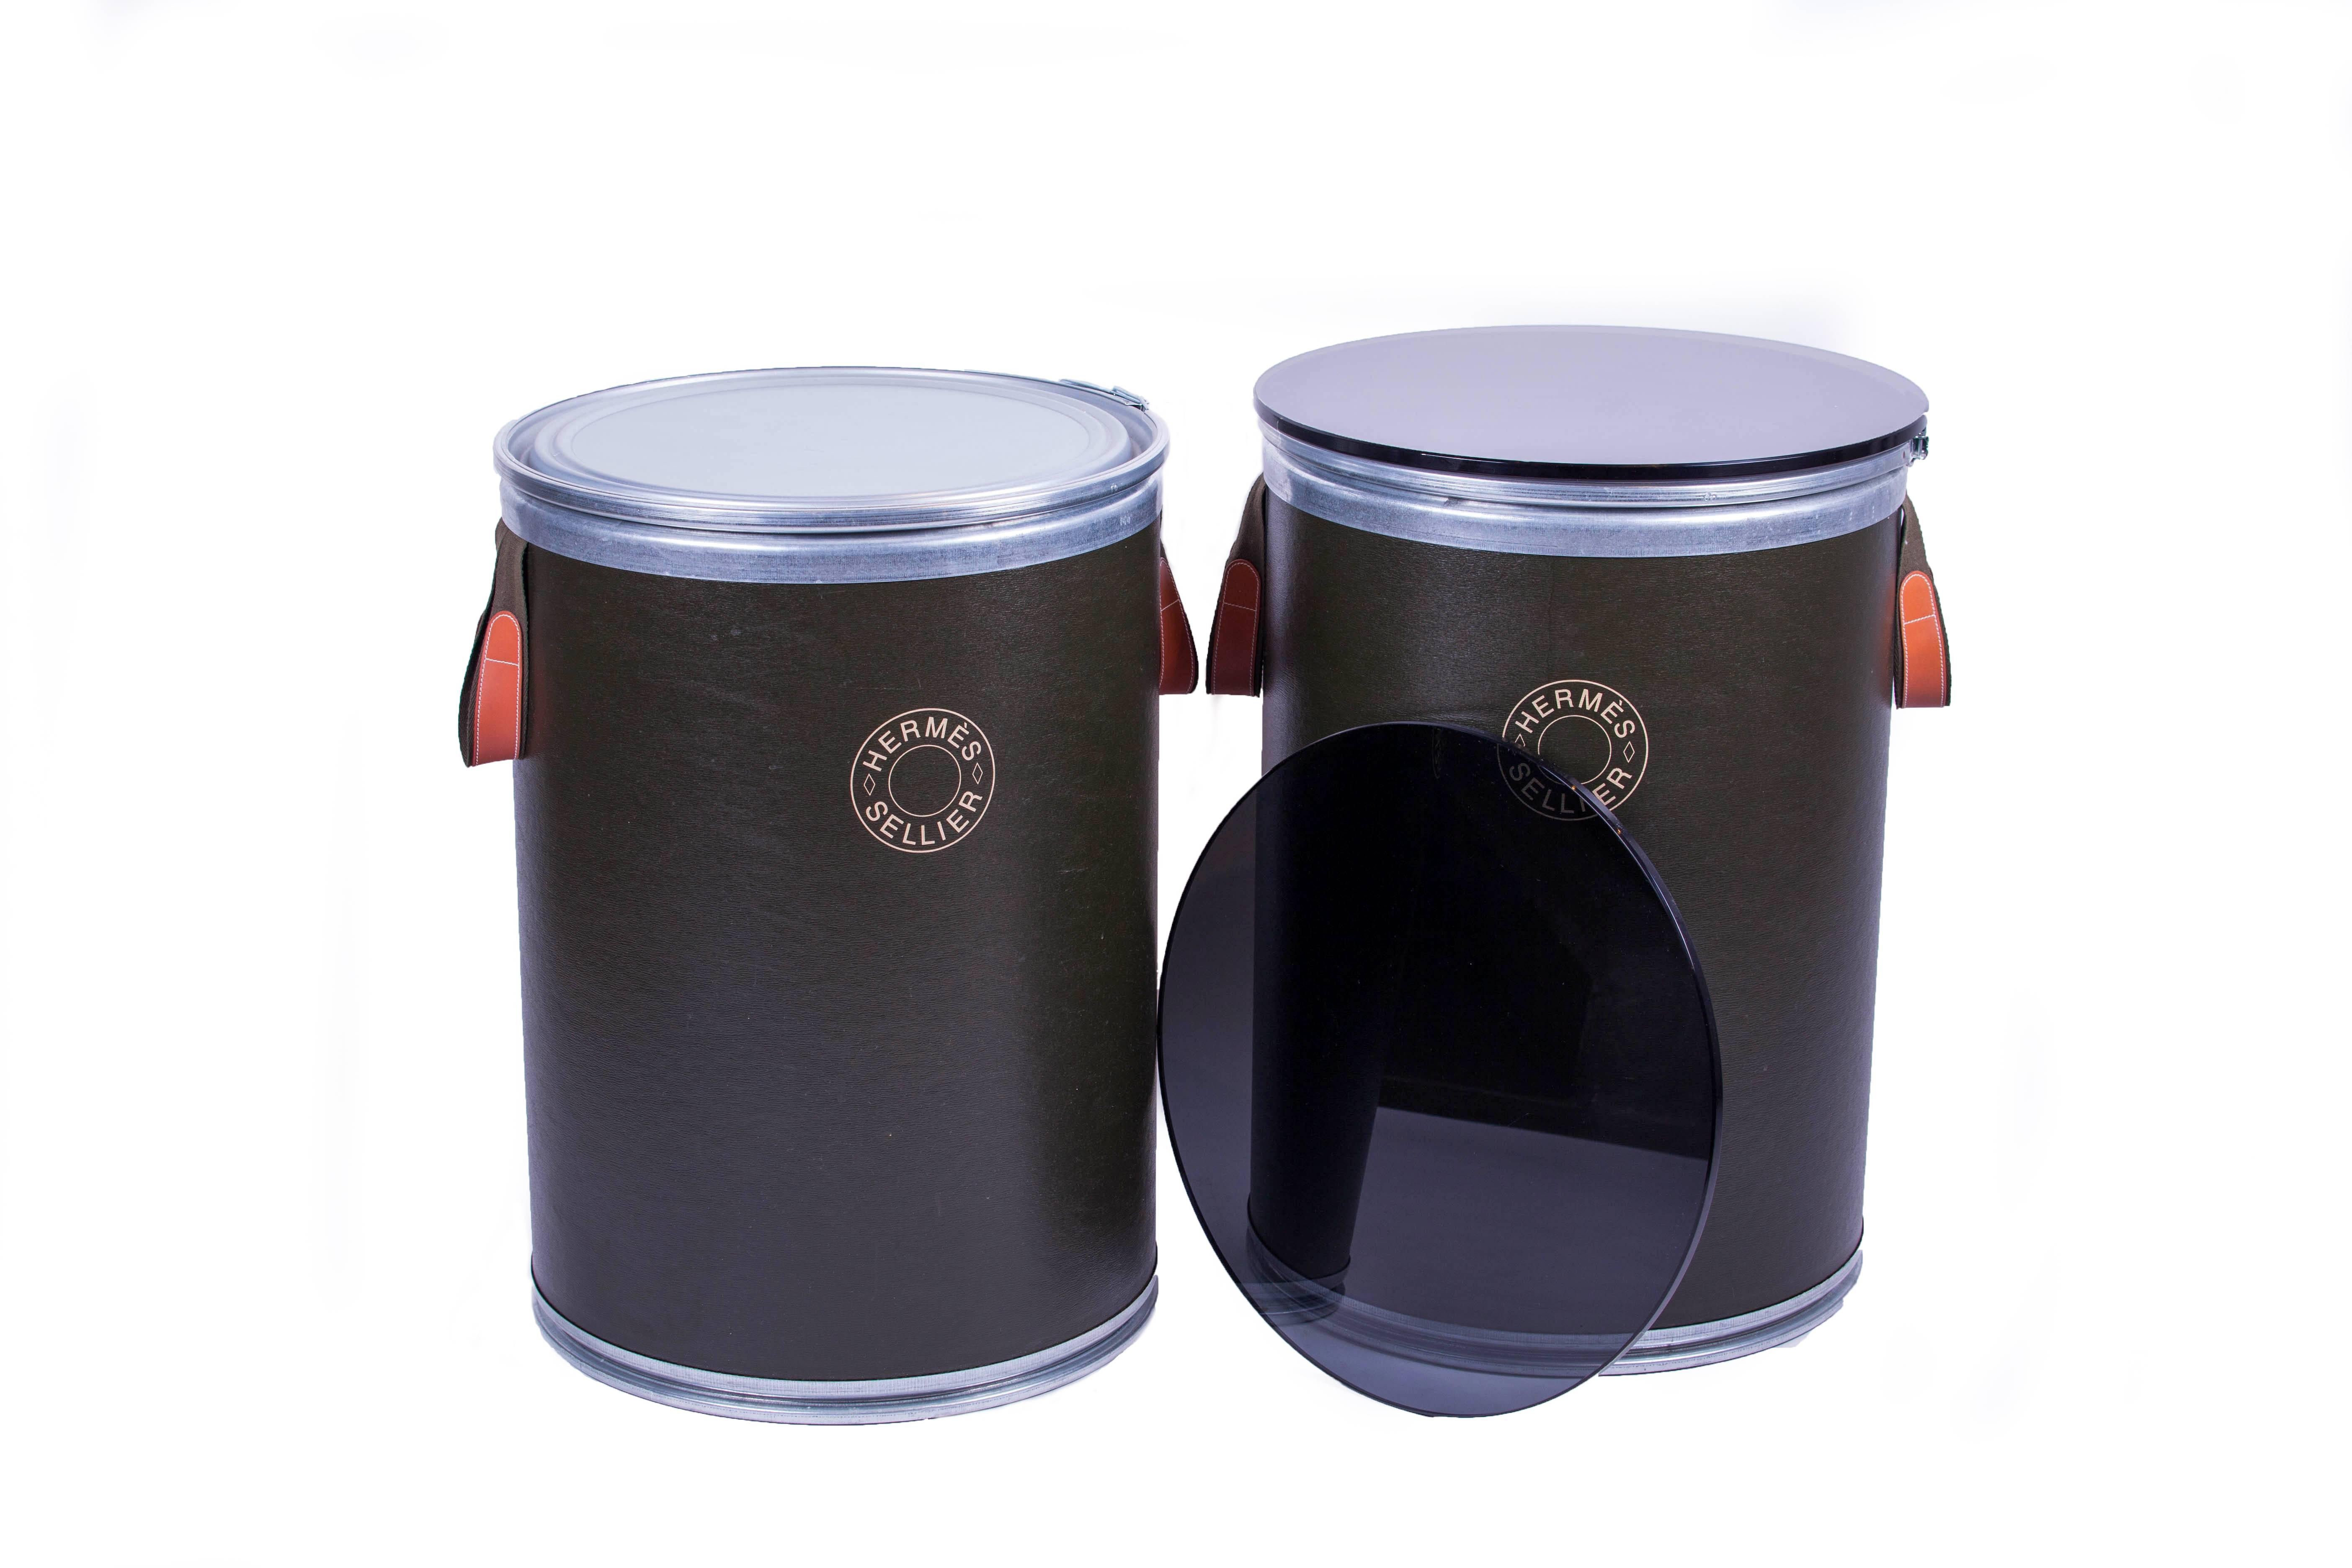 A creative pair of glass topped metal and board circular side tables from Hermes. Initially used as containers to transport the high-end saddles made by Hermes, this pair has been repurposed as side tables with the addition of the smoked glass tops.